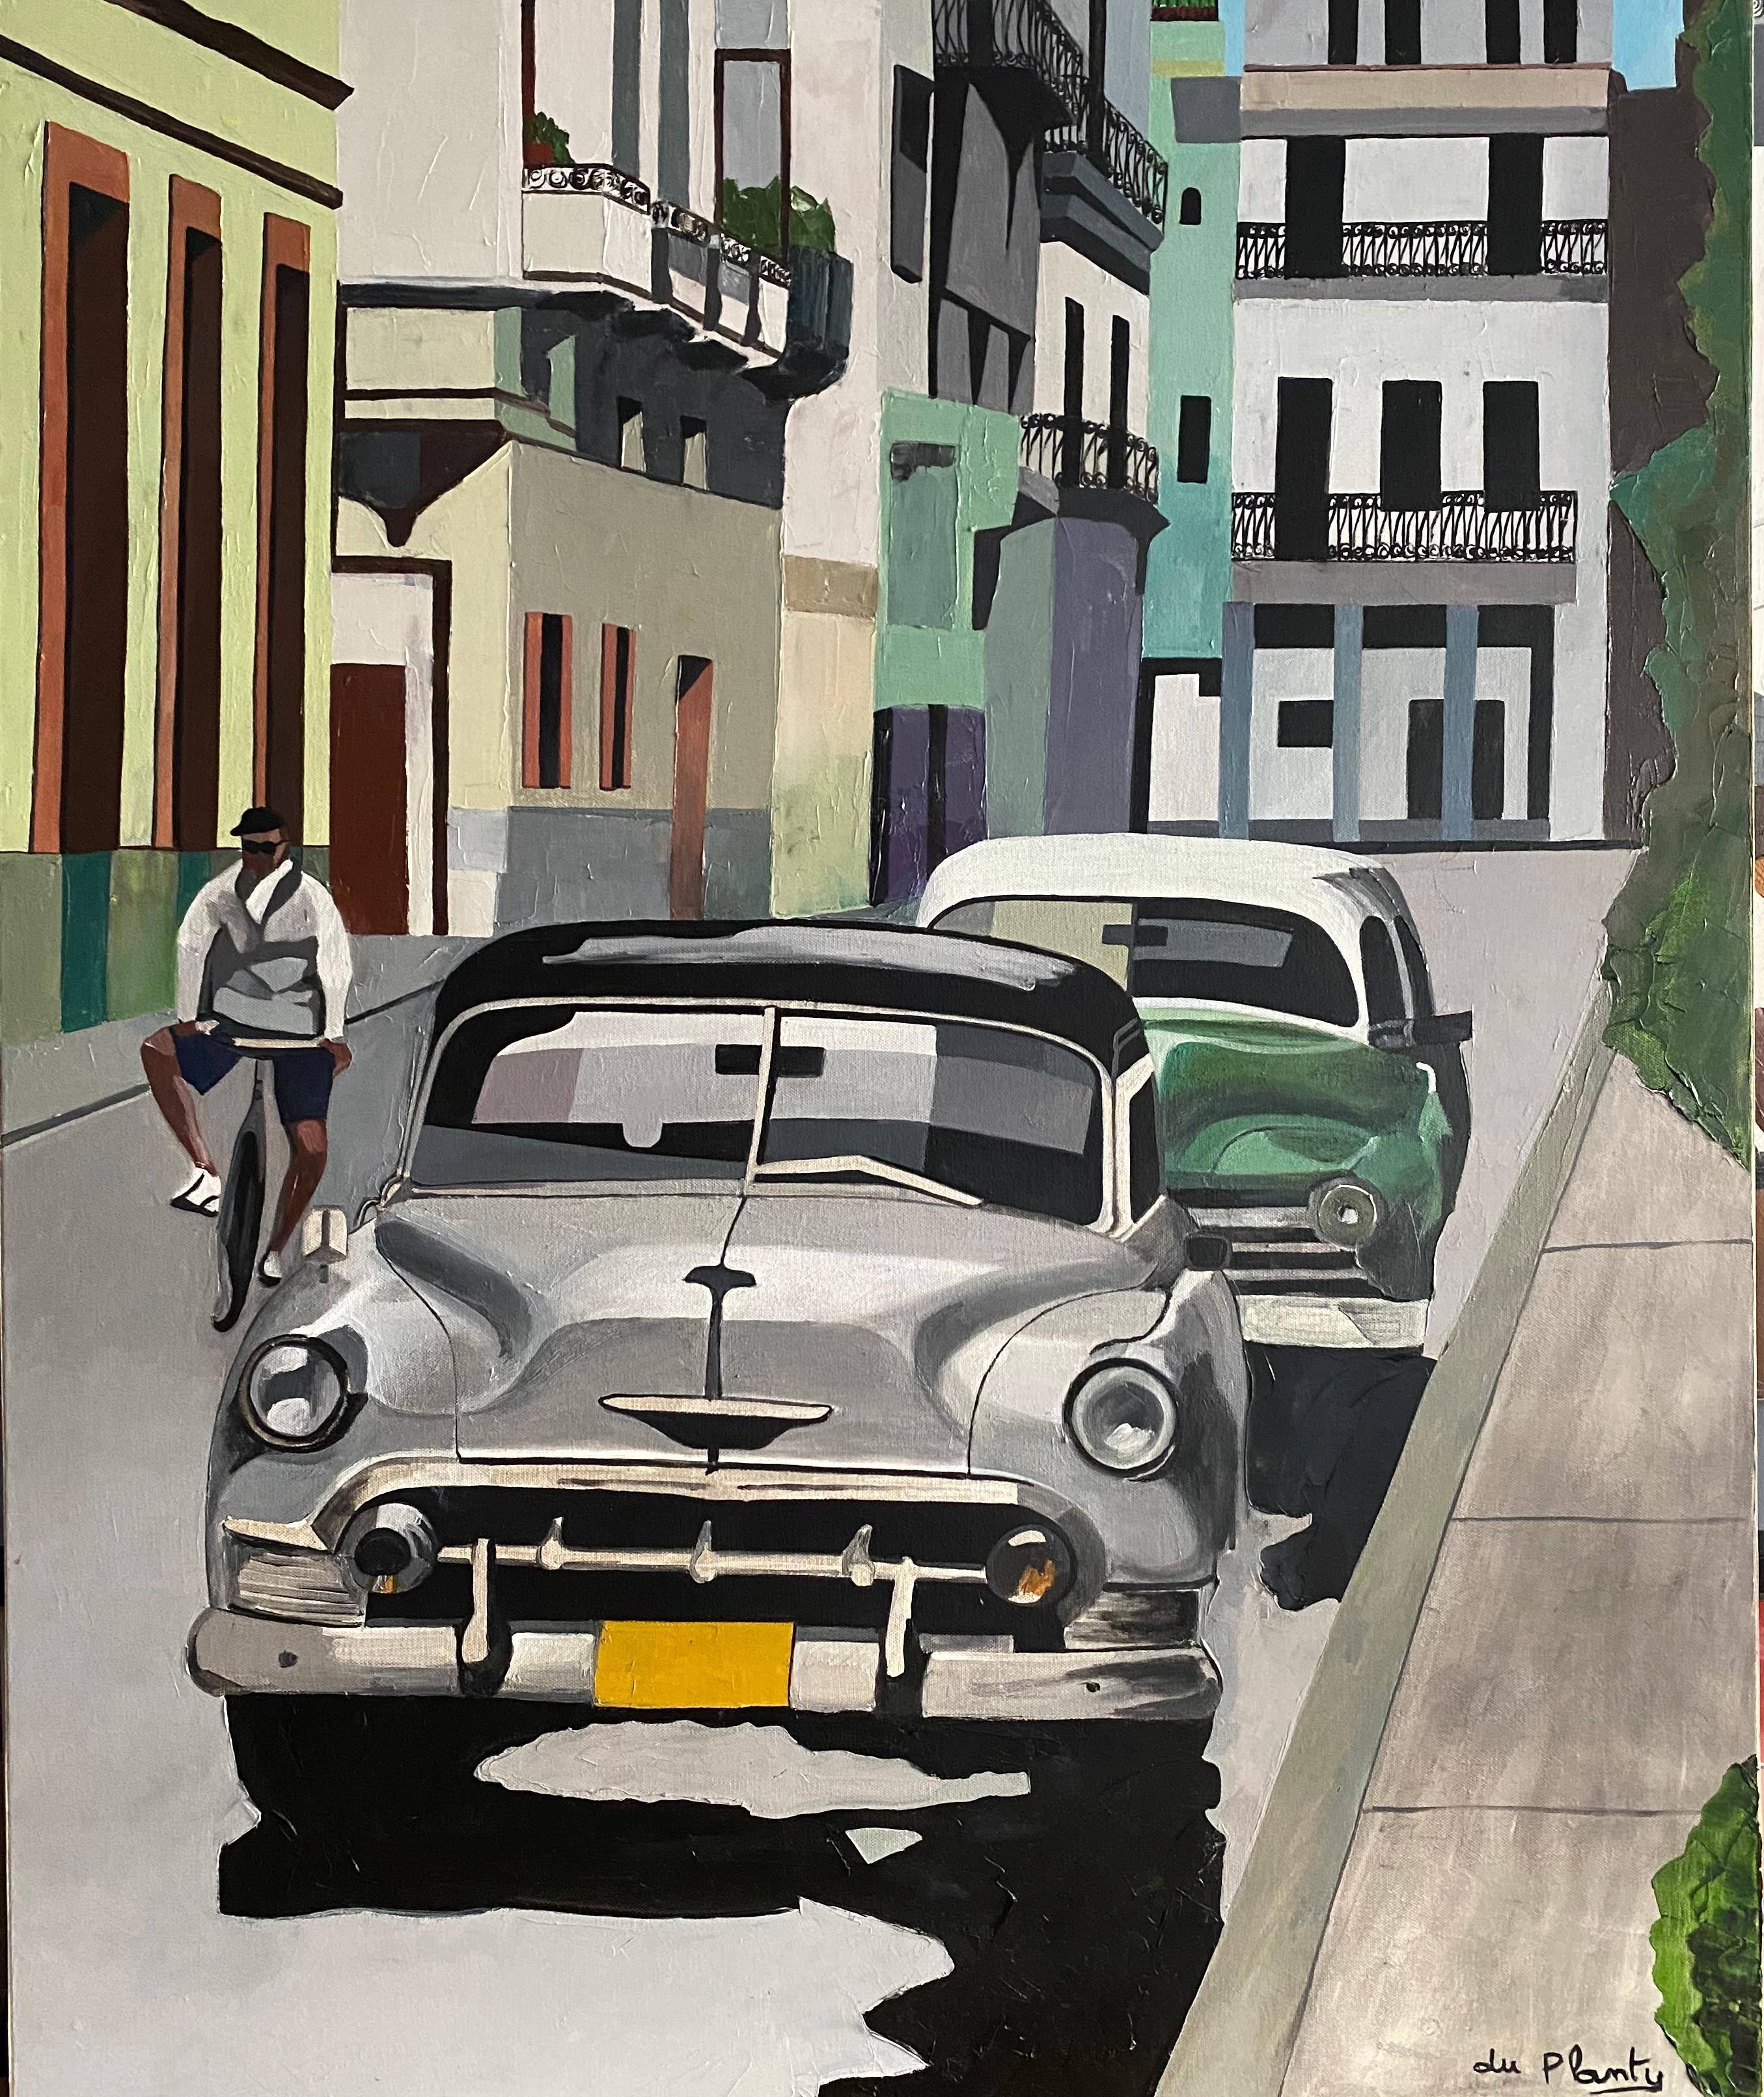 Oil on canvas

Anne du Planty is a French artist born in 1953 who lives & works in Paris, France.Originally from North of France, she discovered lights of the South, the brightness of the sun, the shade of the alleyways while travelling in Cuba,